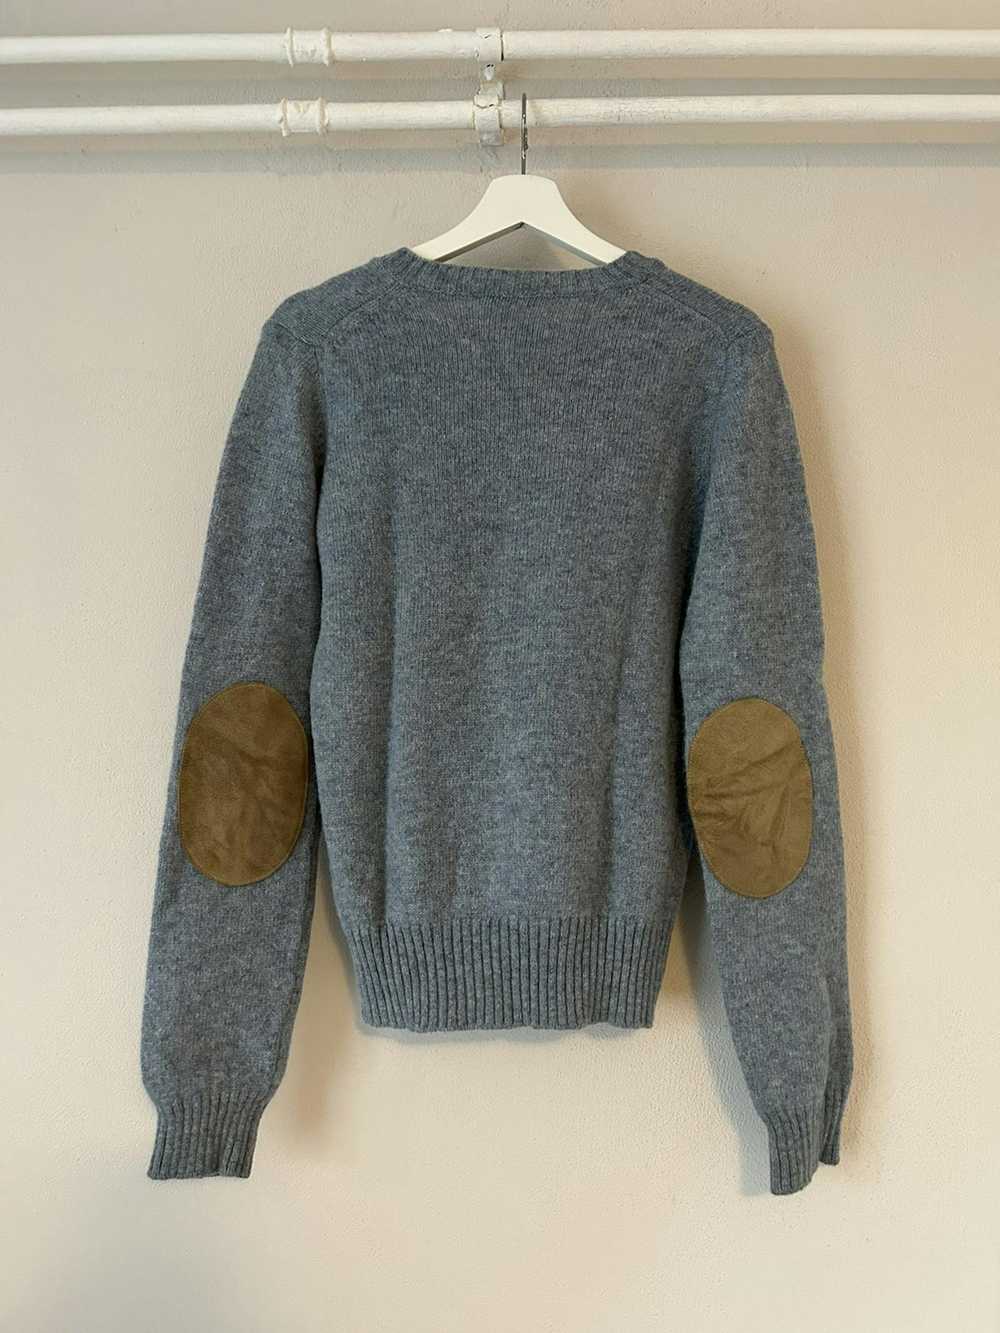 Prada Wool V-Neck Pullover with Leather Elbow Pads - image 2